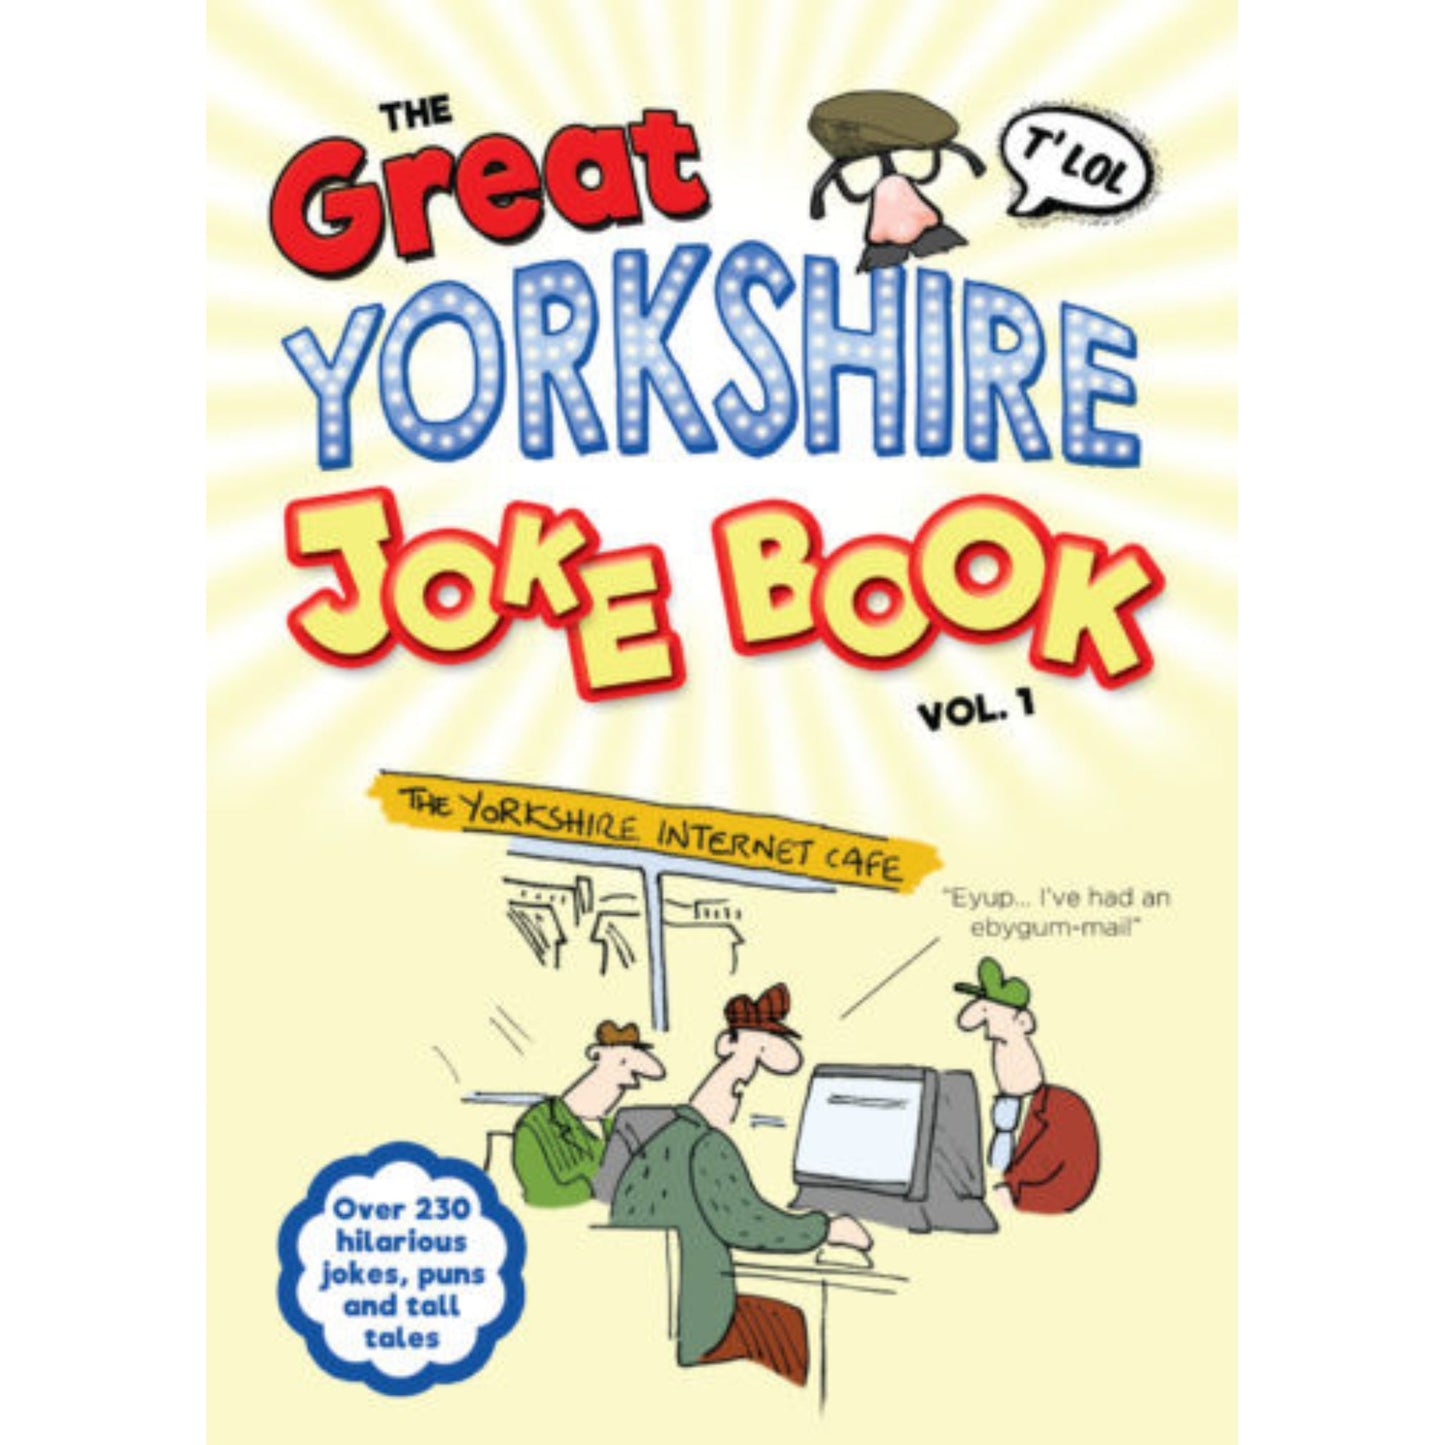 The Great Yorkshire Joke Book Vol. 1 - The Great Yorkshire Shop